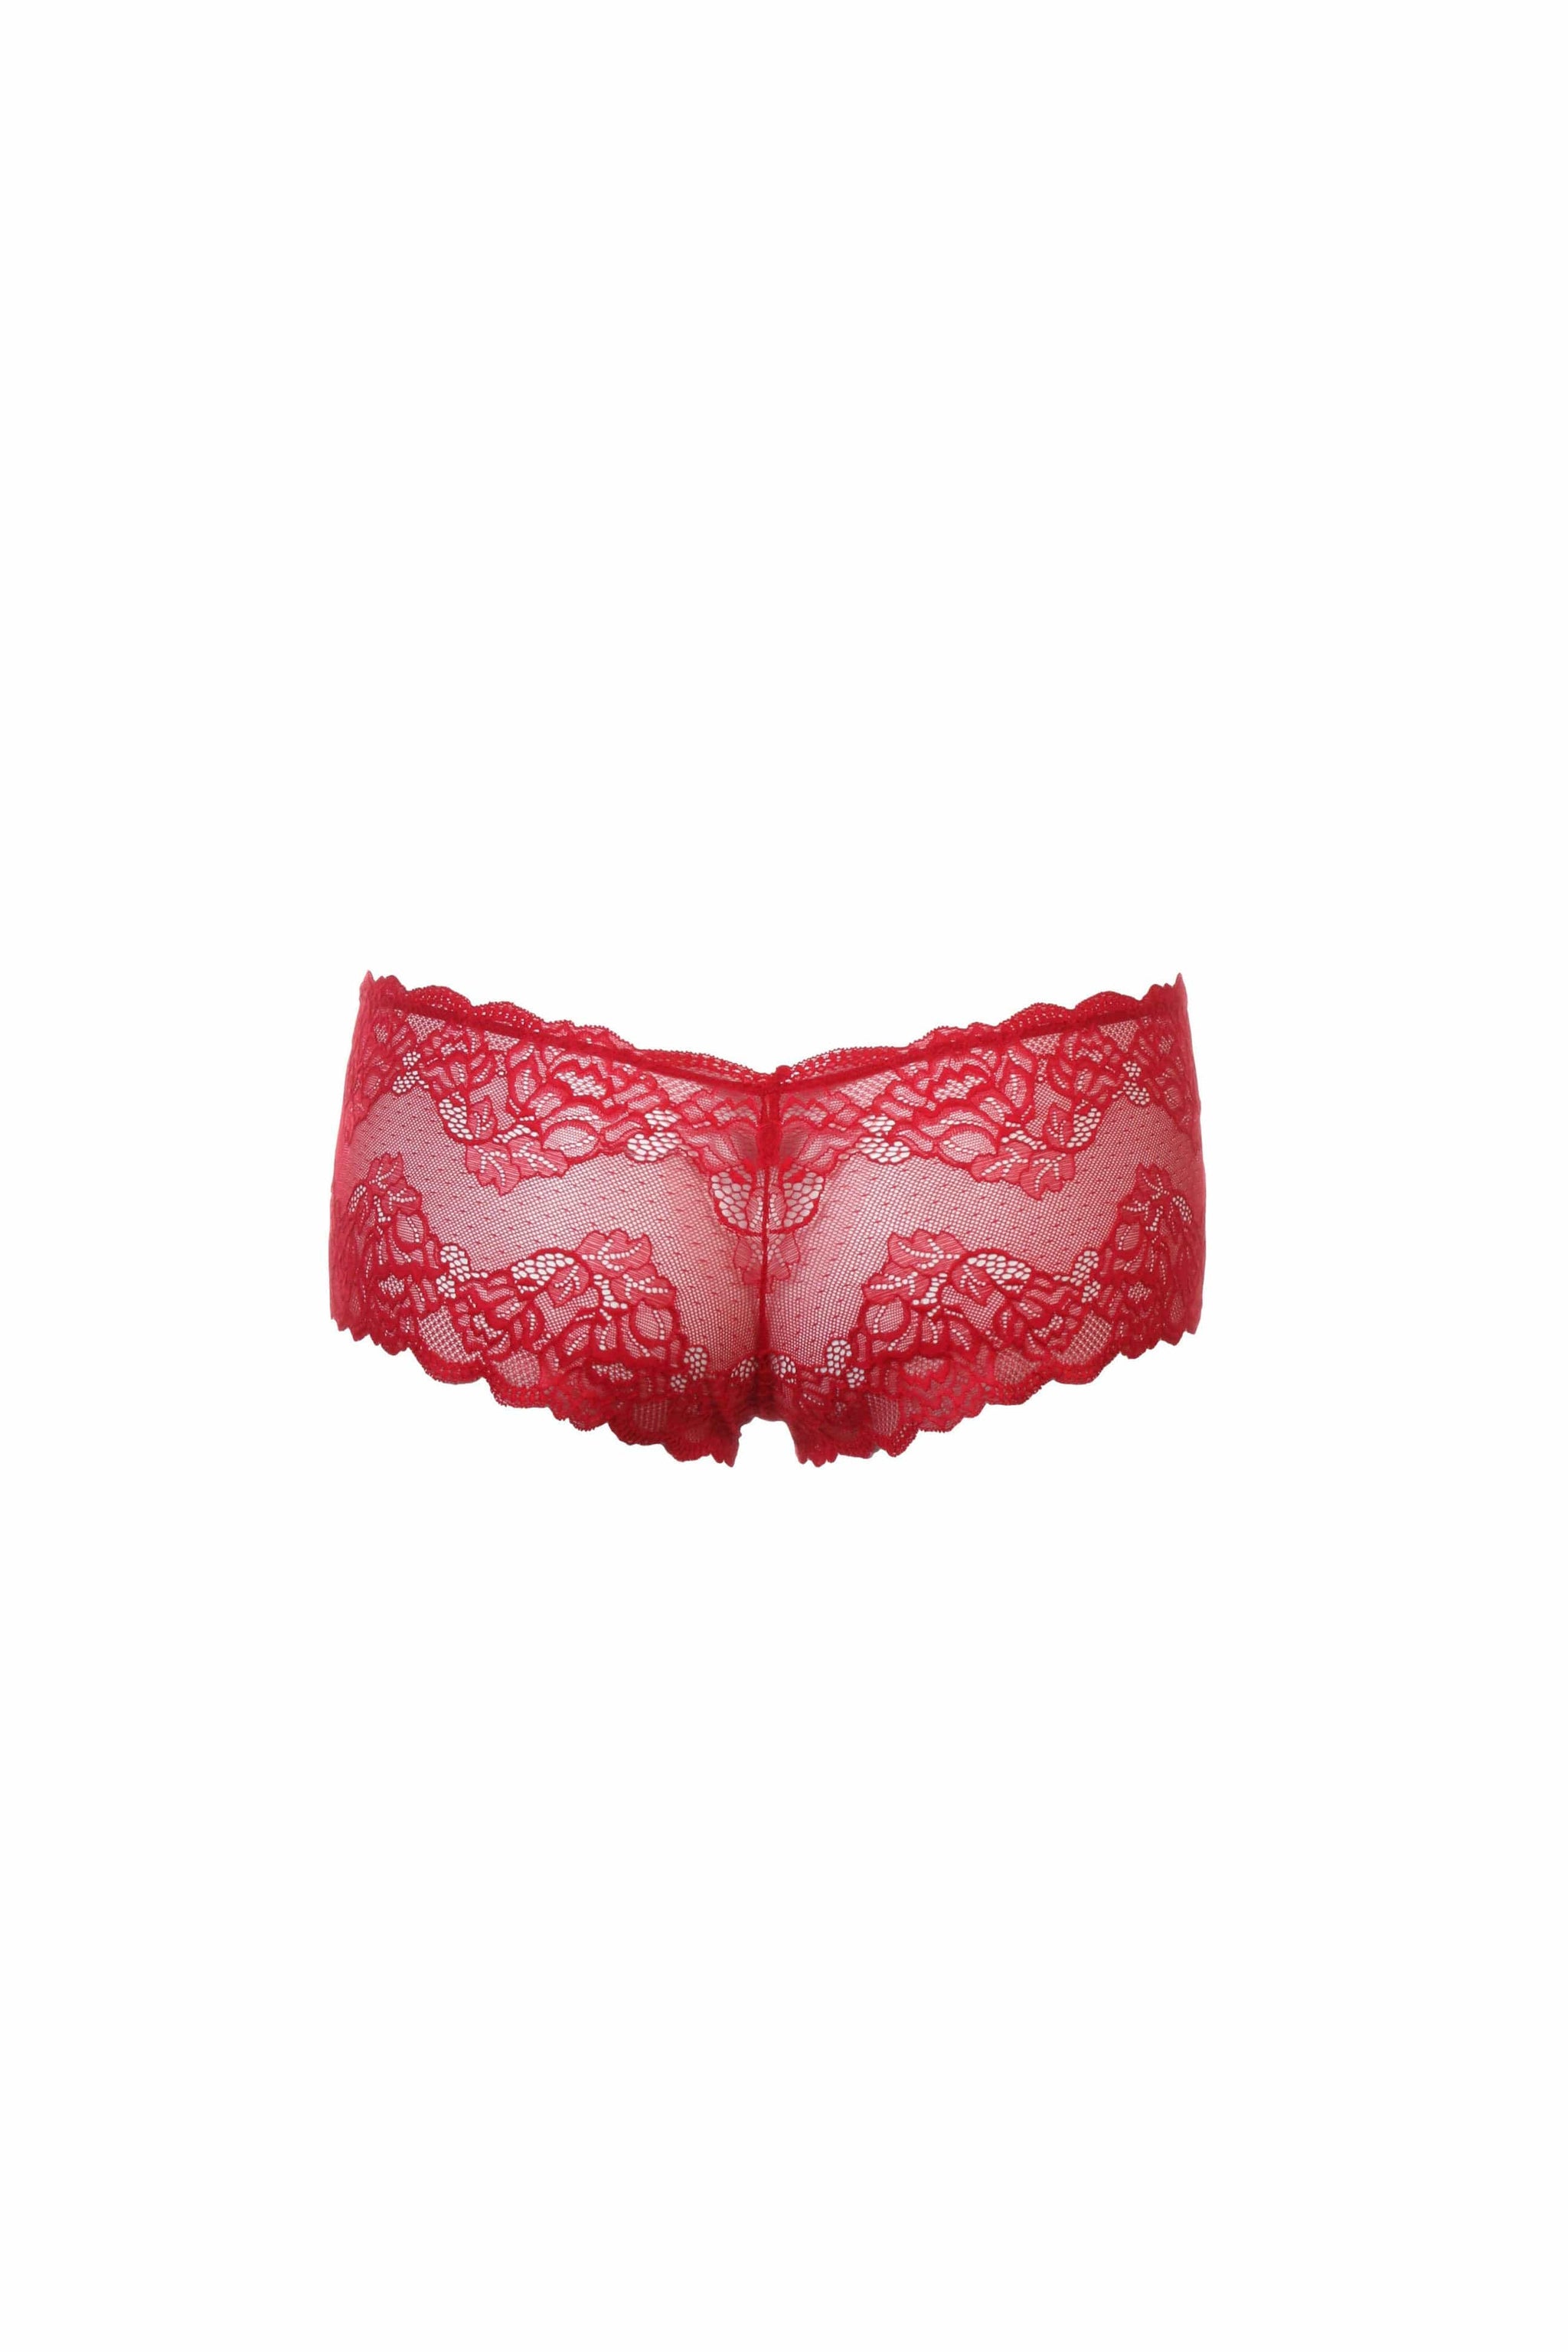 Cacique~New With Tags~Magenta Lace-Back Cheeky Panty~Size 14-16W (XL-0X)